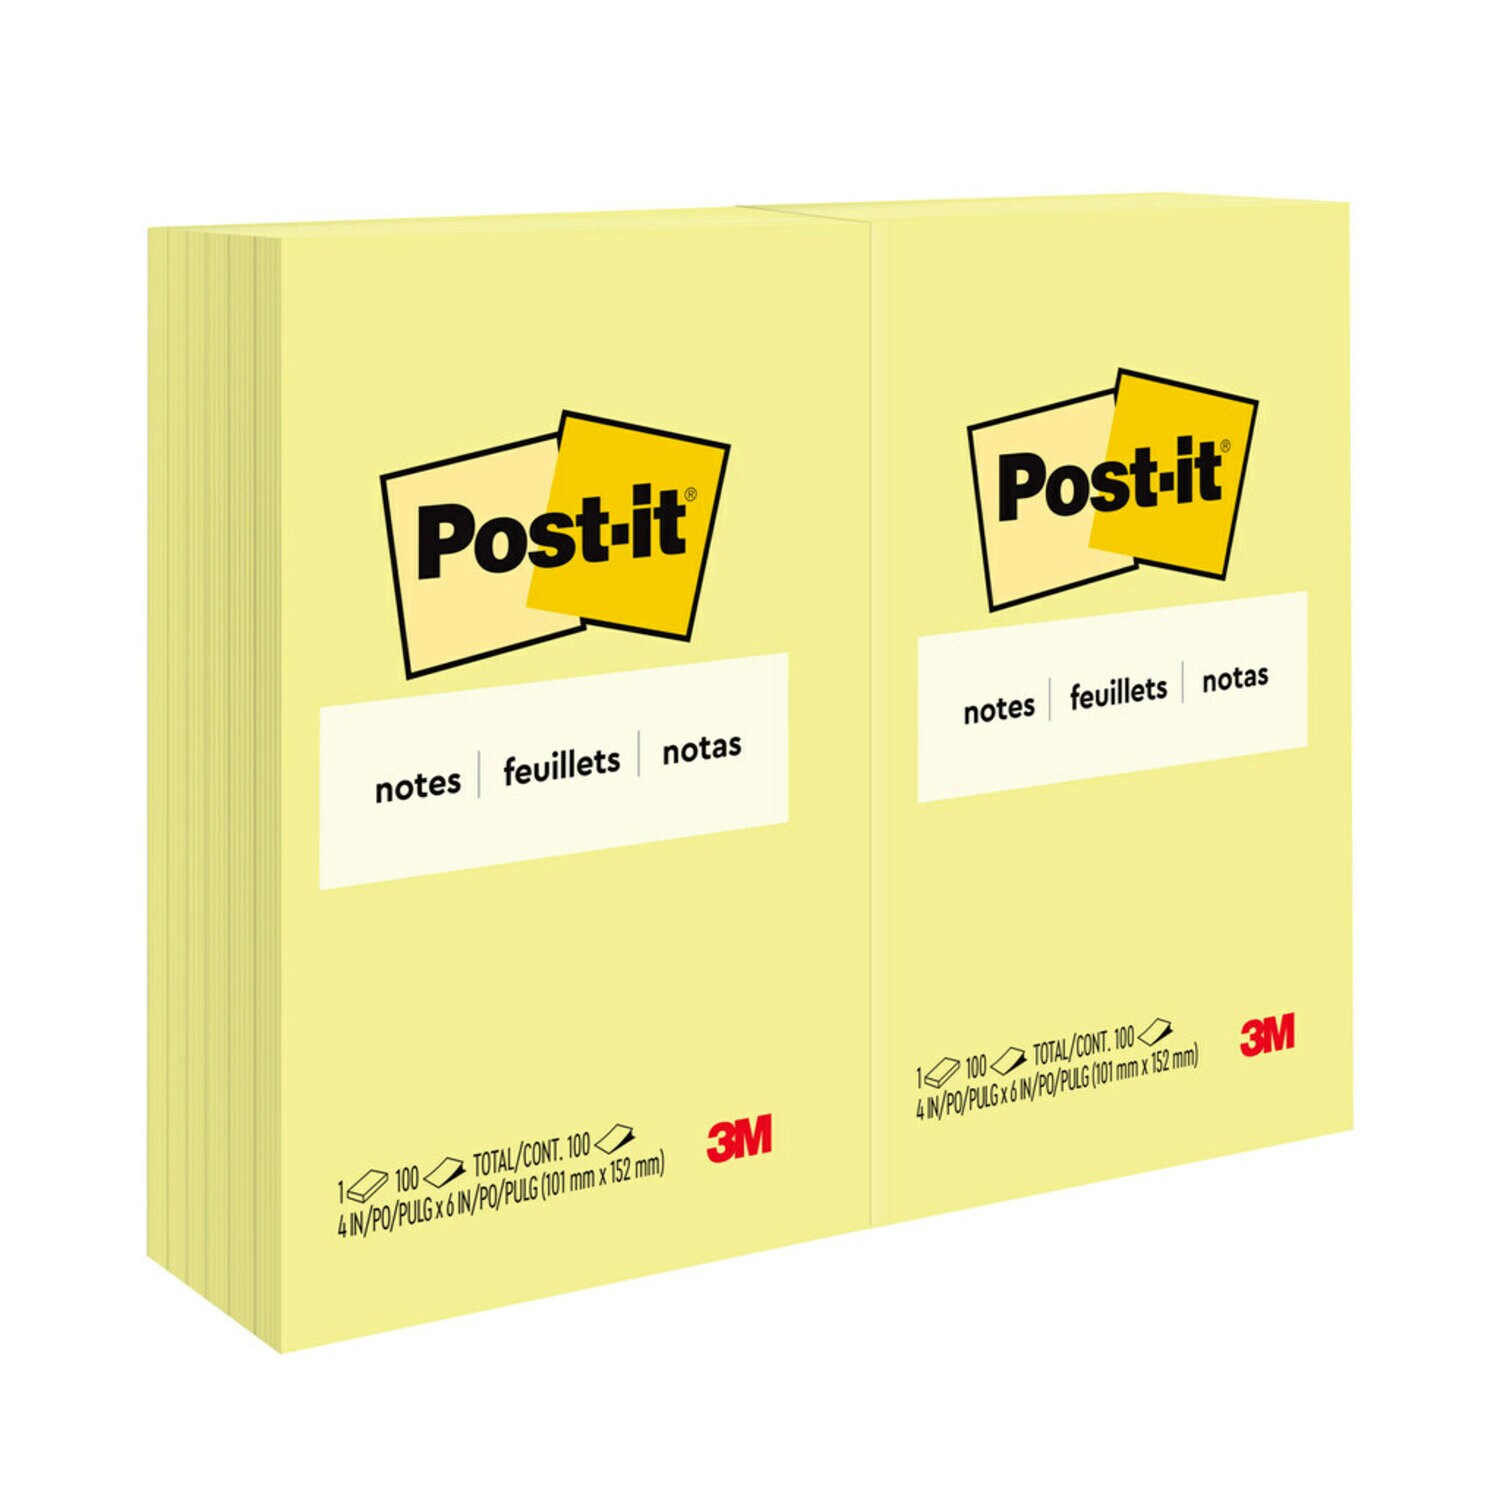 7100230236 - Post-it Products Notes 659, 4 in x 6 in (101 mm x 152 mm)